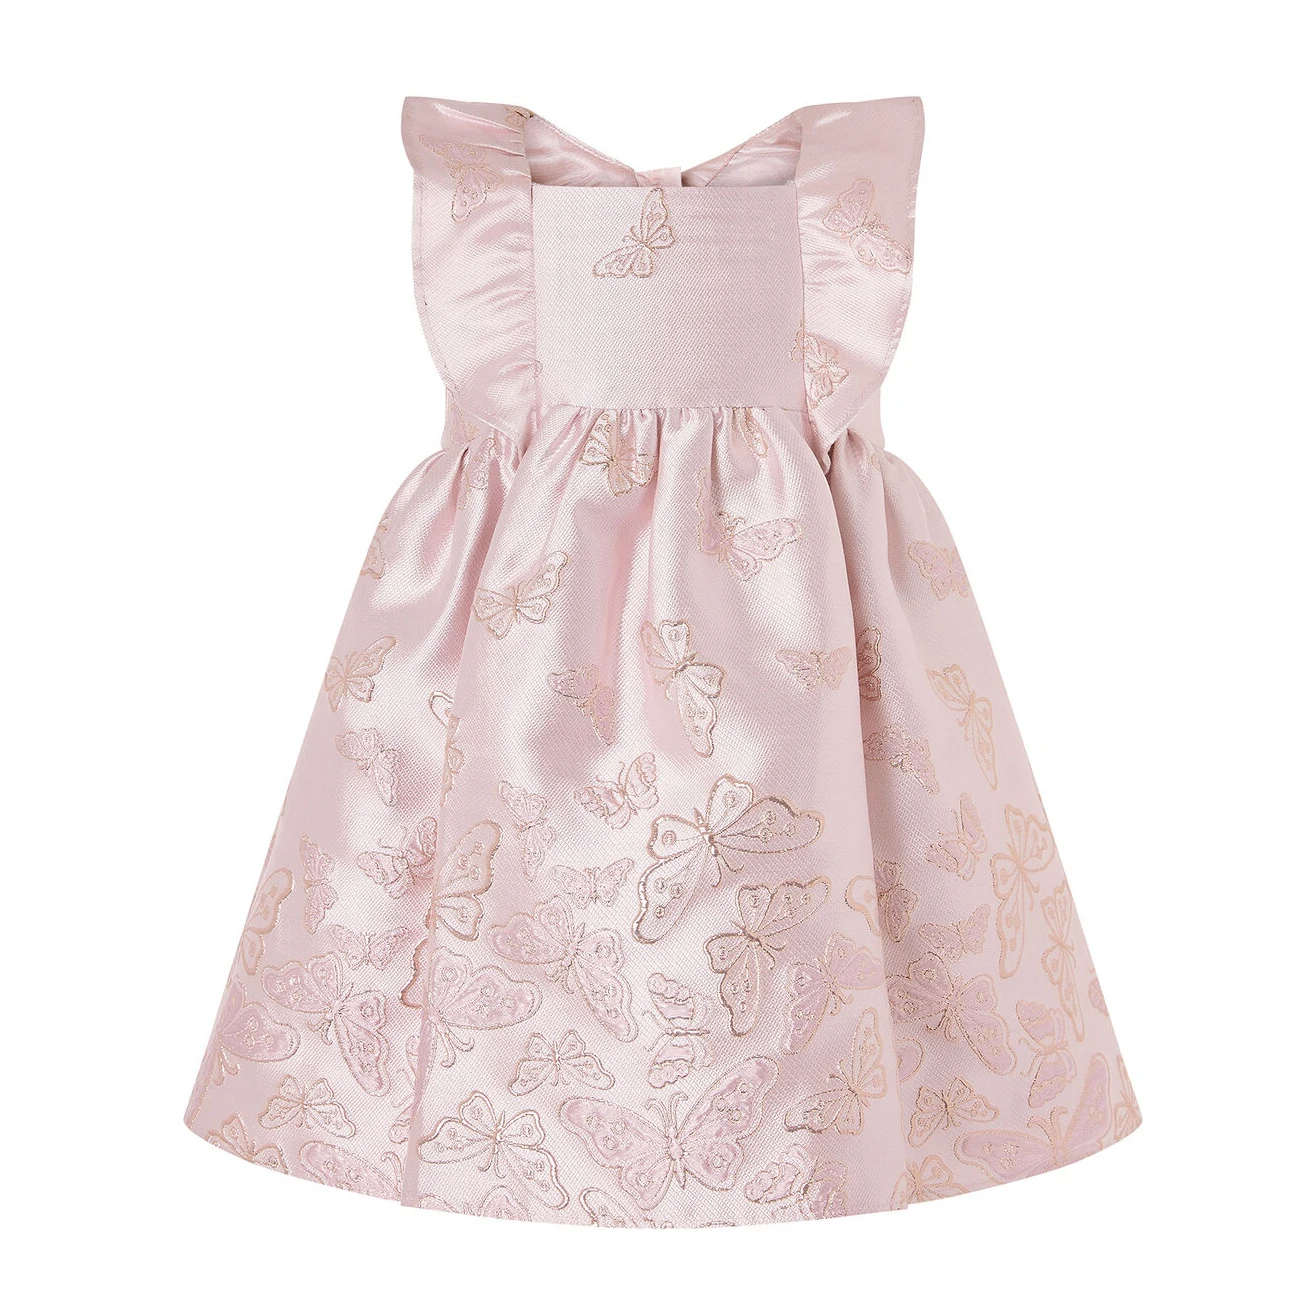 Private label butterfly pattern baby girls kids birthday party wear dress for girls jacquard fancy party dresses for toddlers